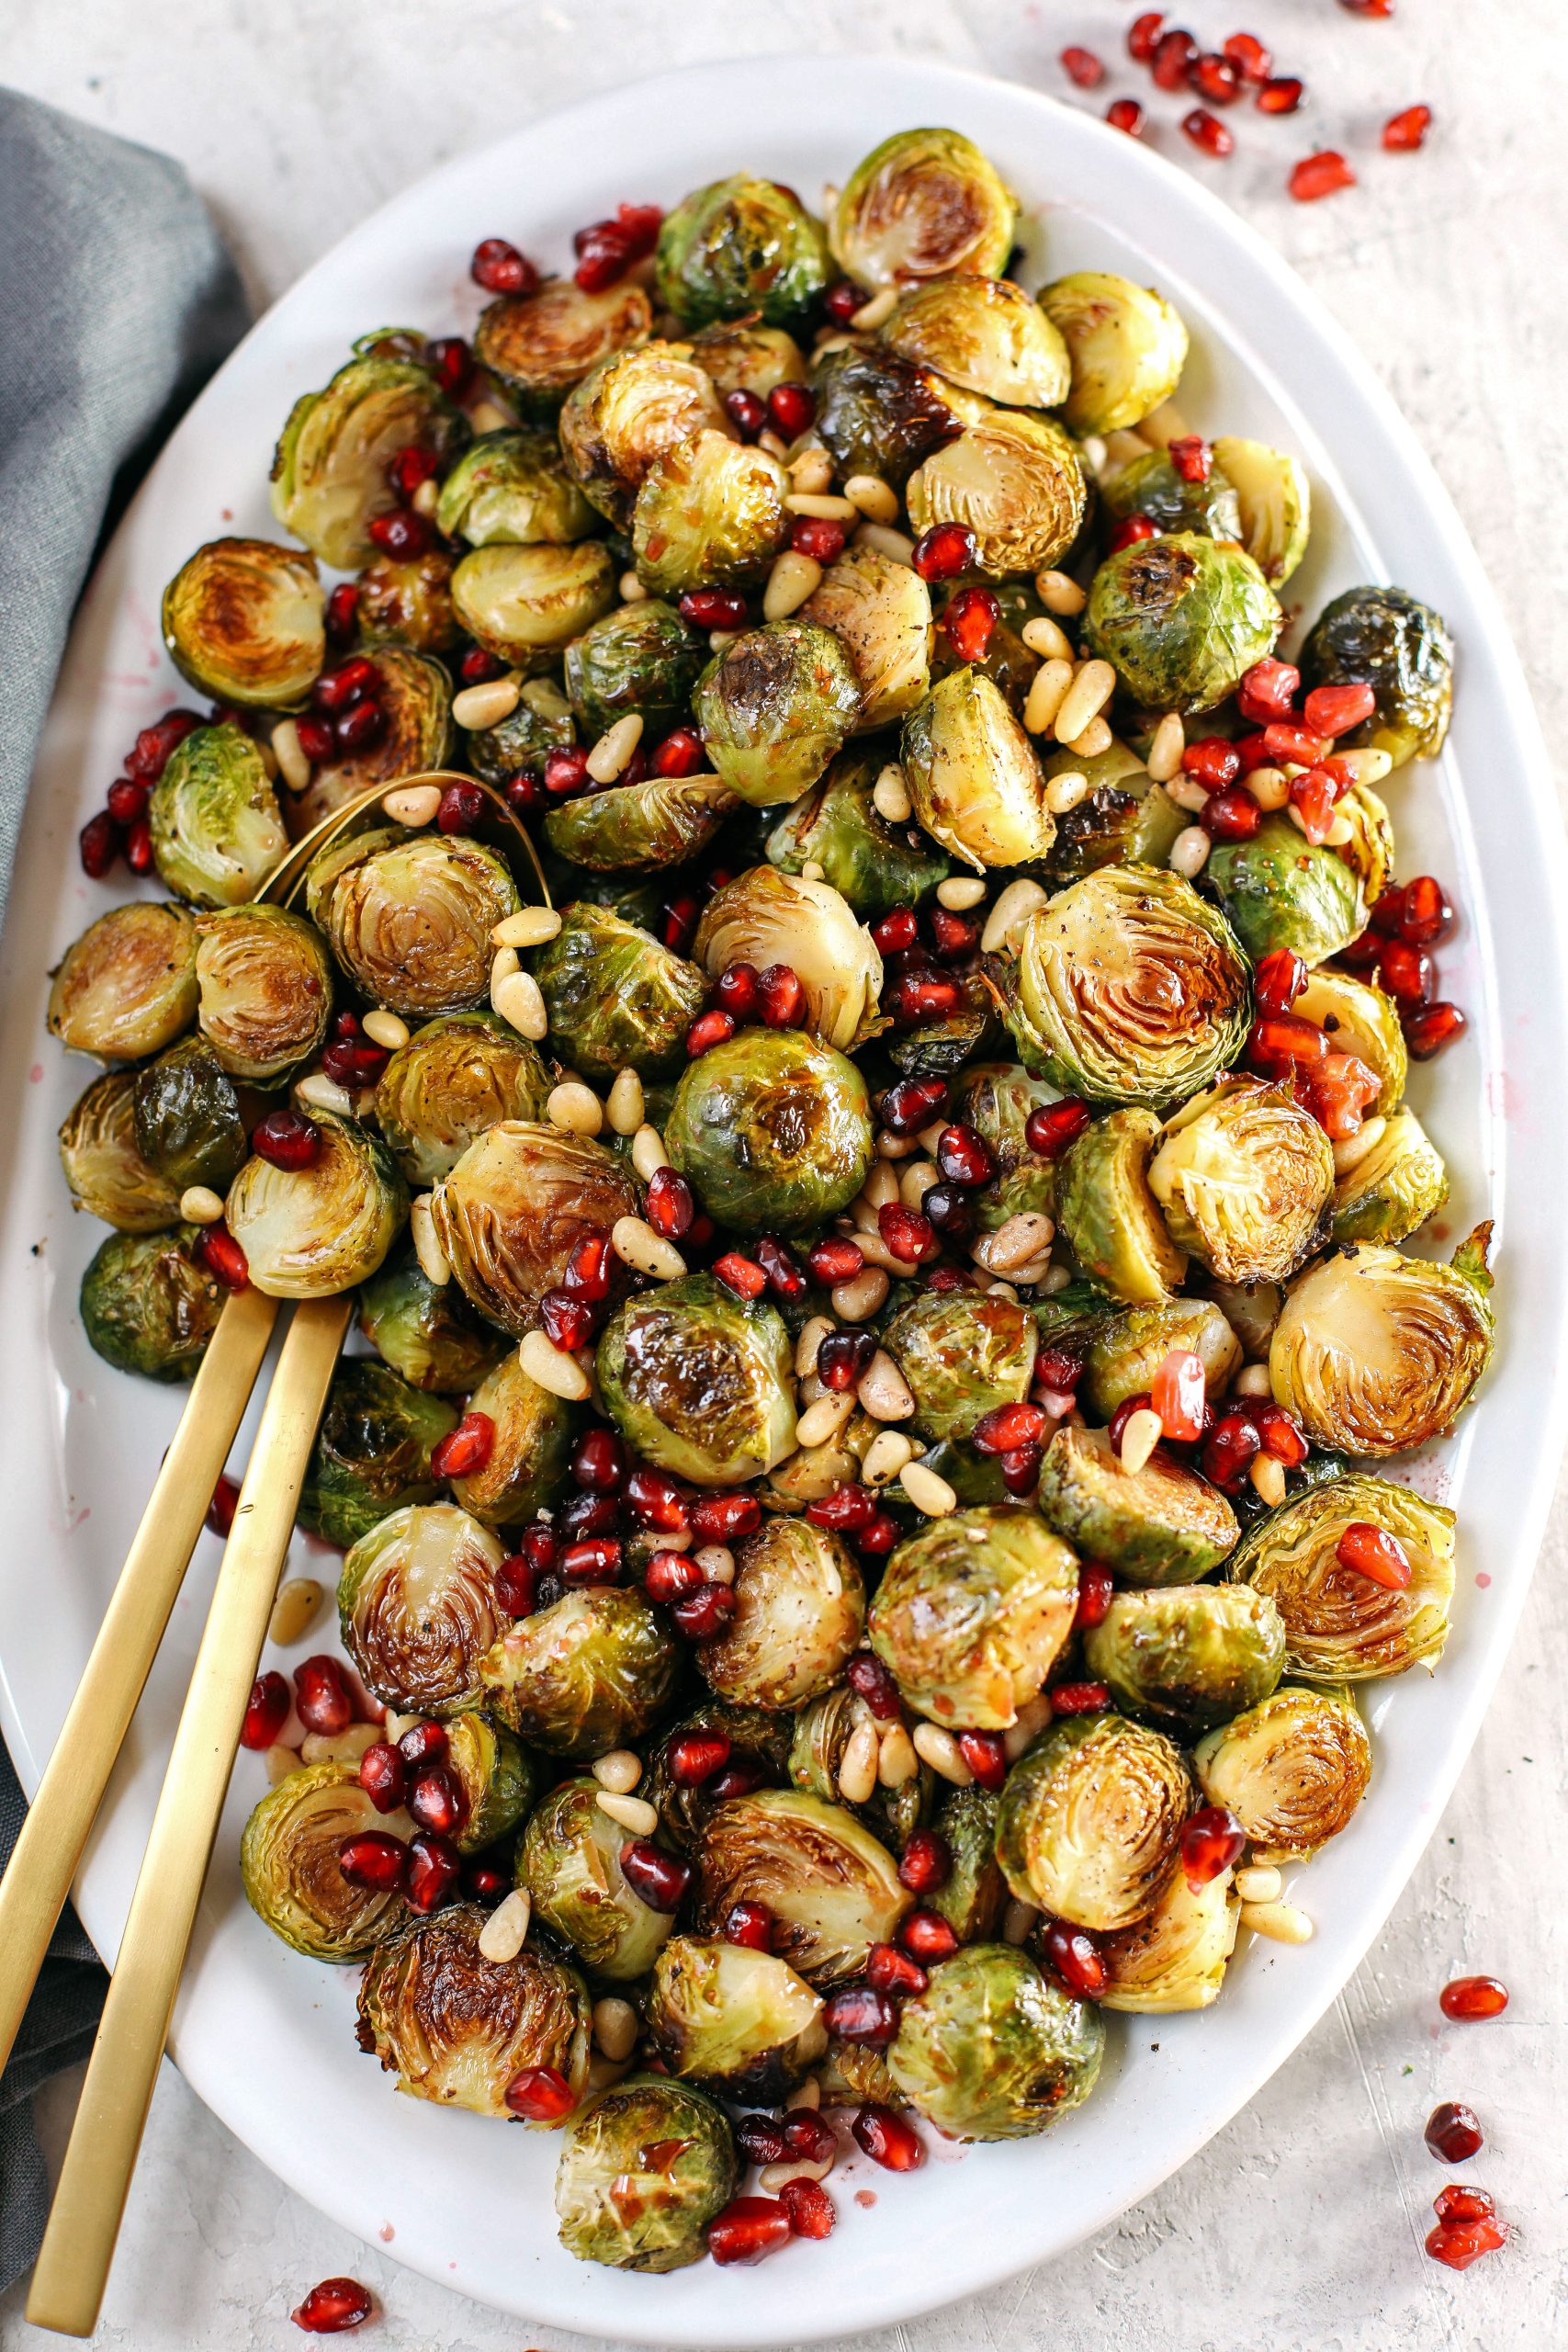 These Pomegranate Glazed Brussels Sprouts are savory, sweet and roasted to perfection making them the perfect holiday side dish for your table this season!